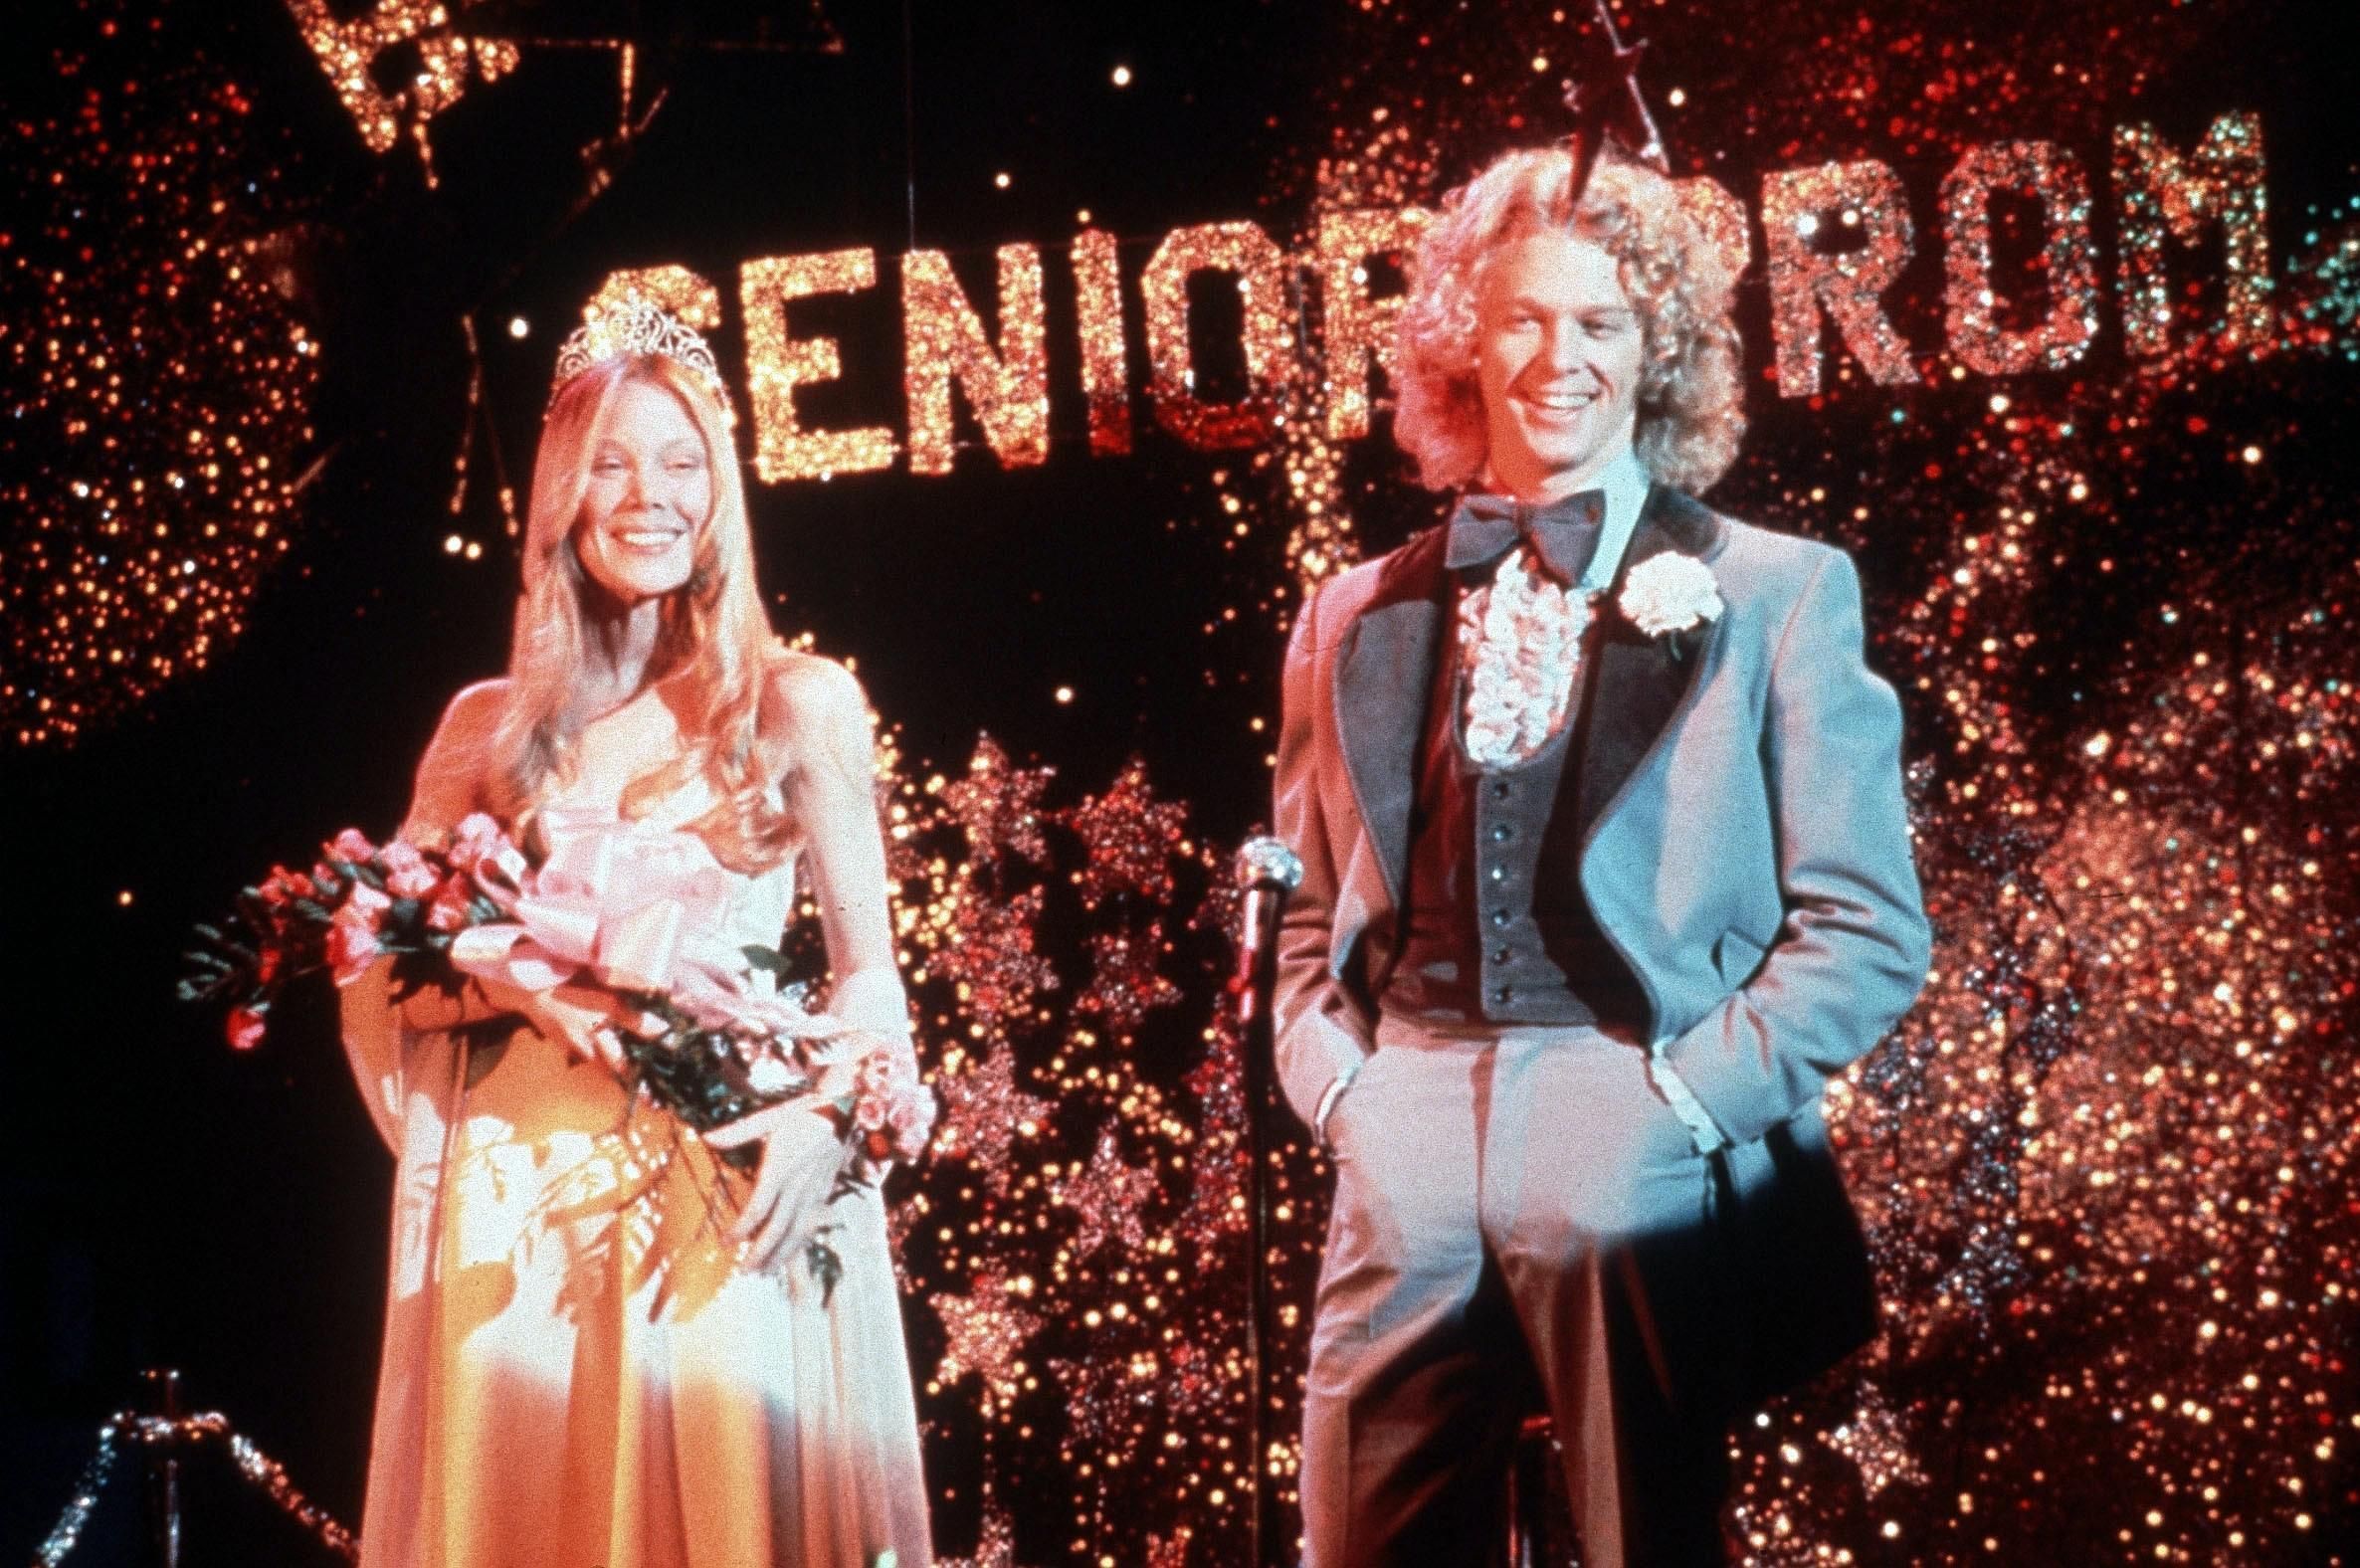 Prom scene from Carrie